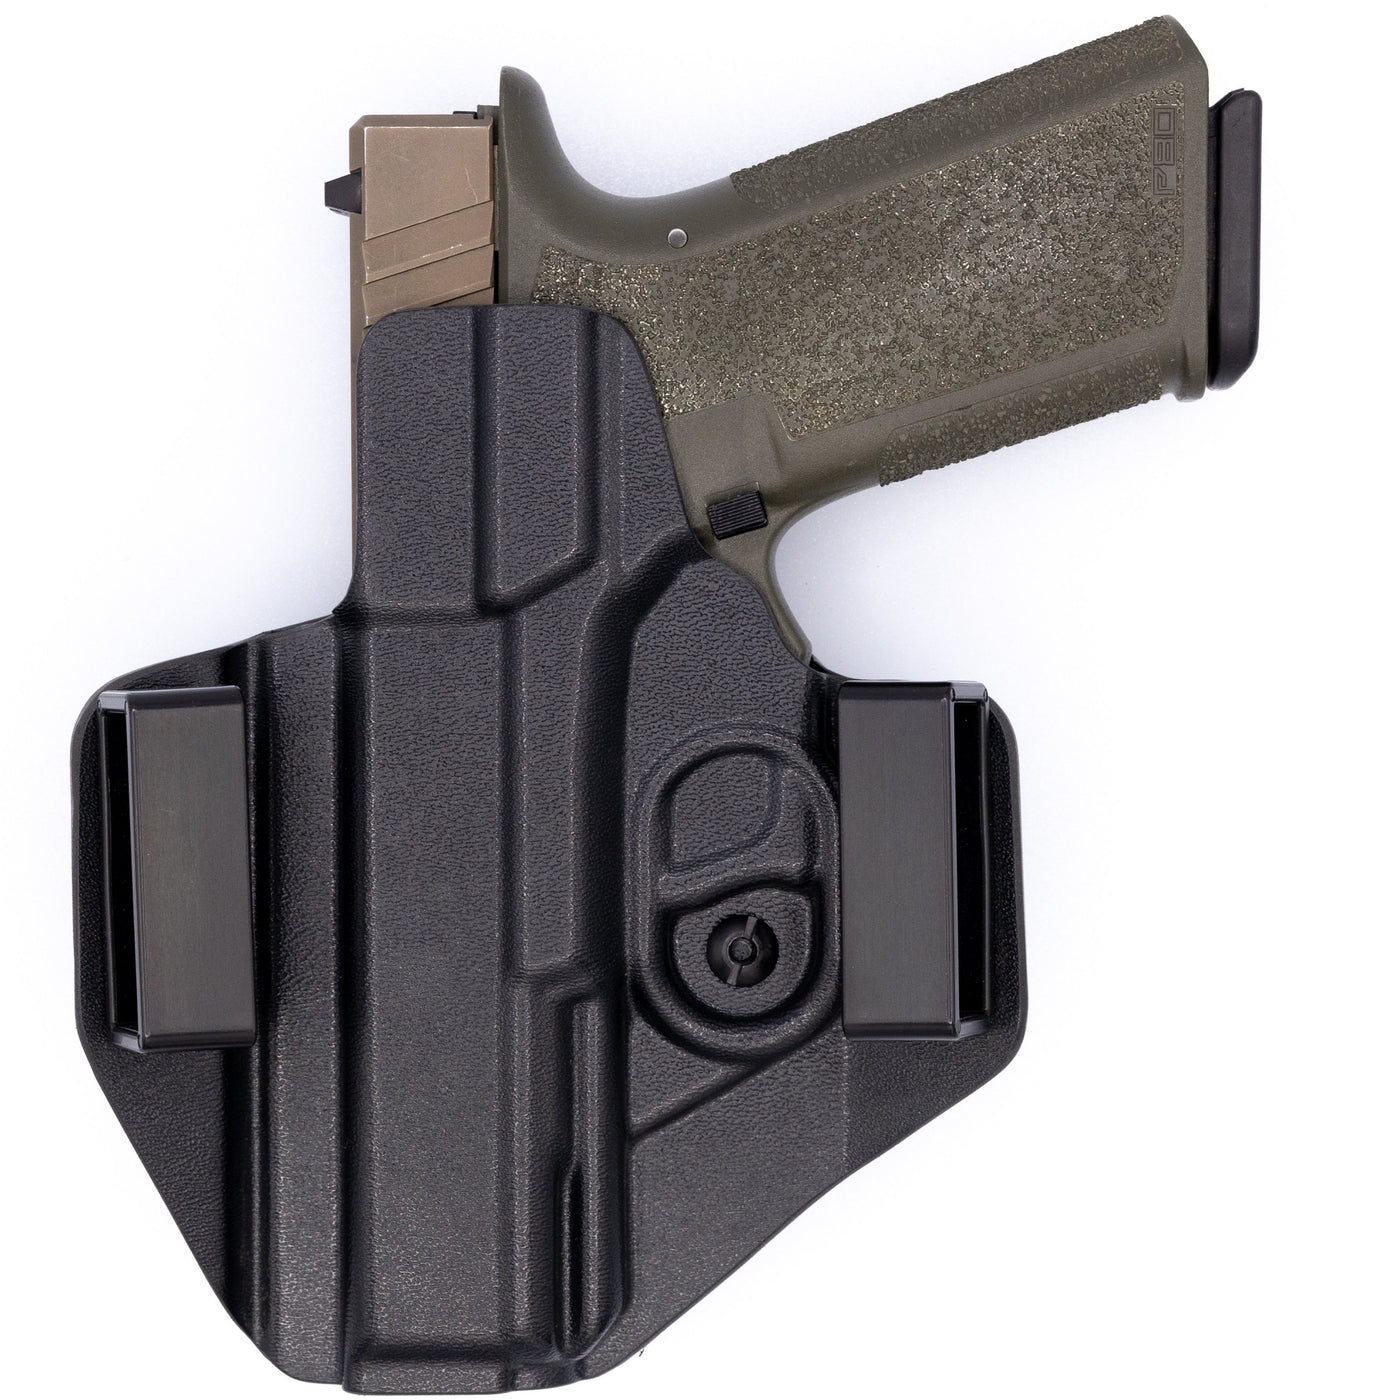 C&G Holsters OWB Outside the waistband Holster for the Polymer80 Poly80 PF9/40v2 PF9/40c